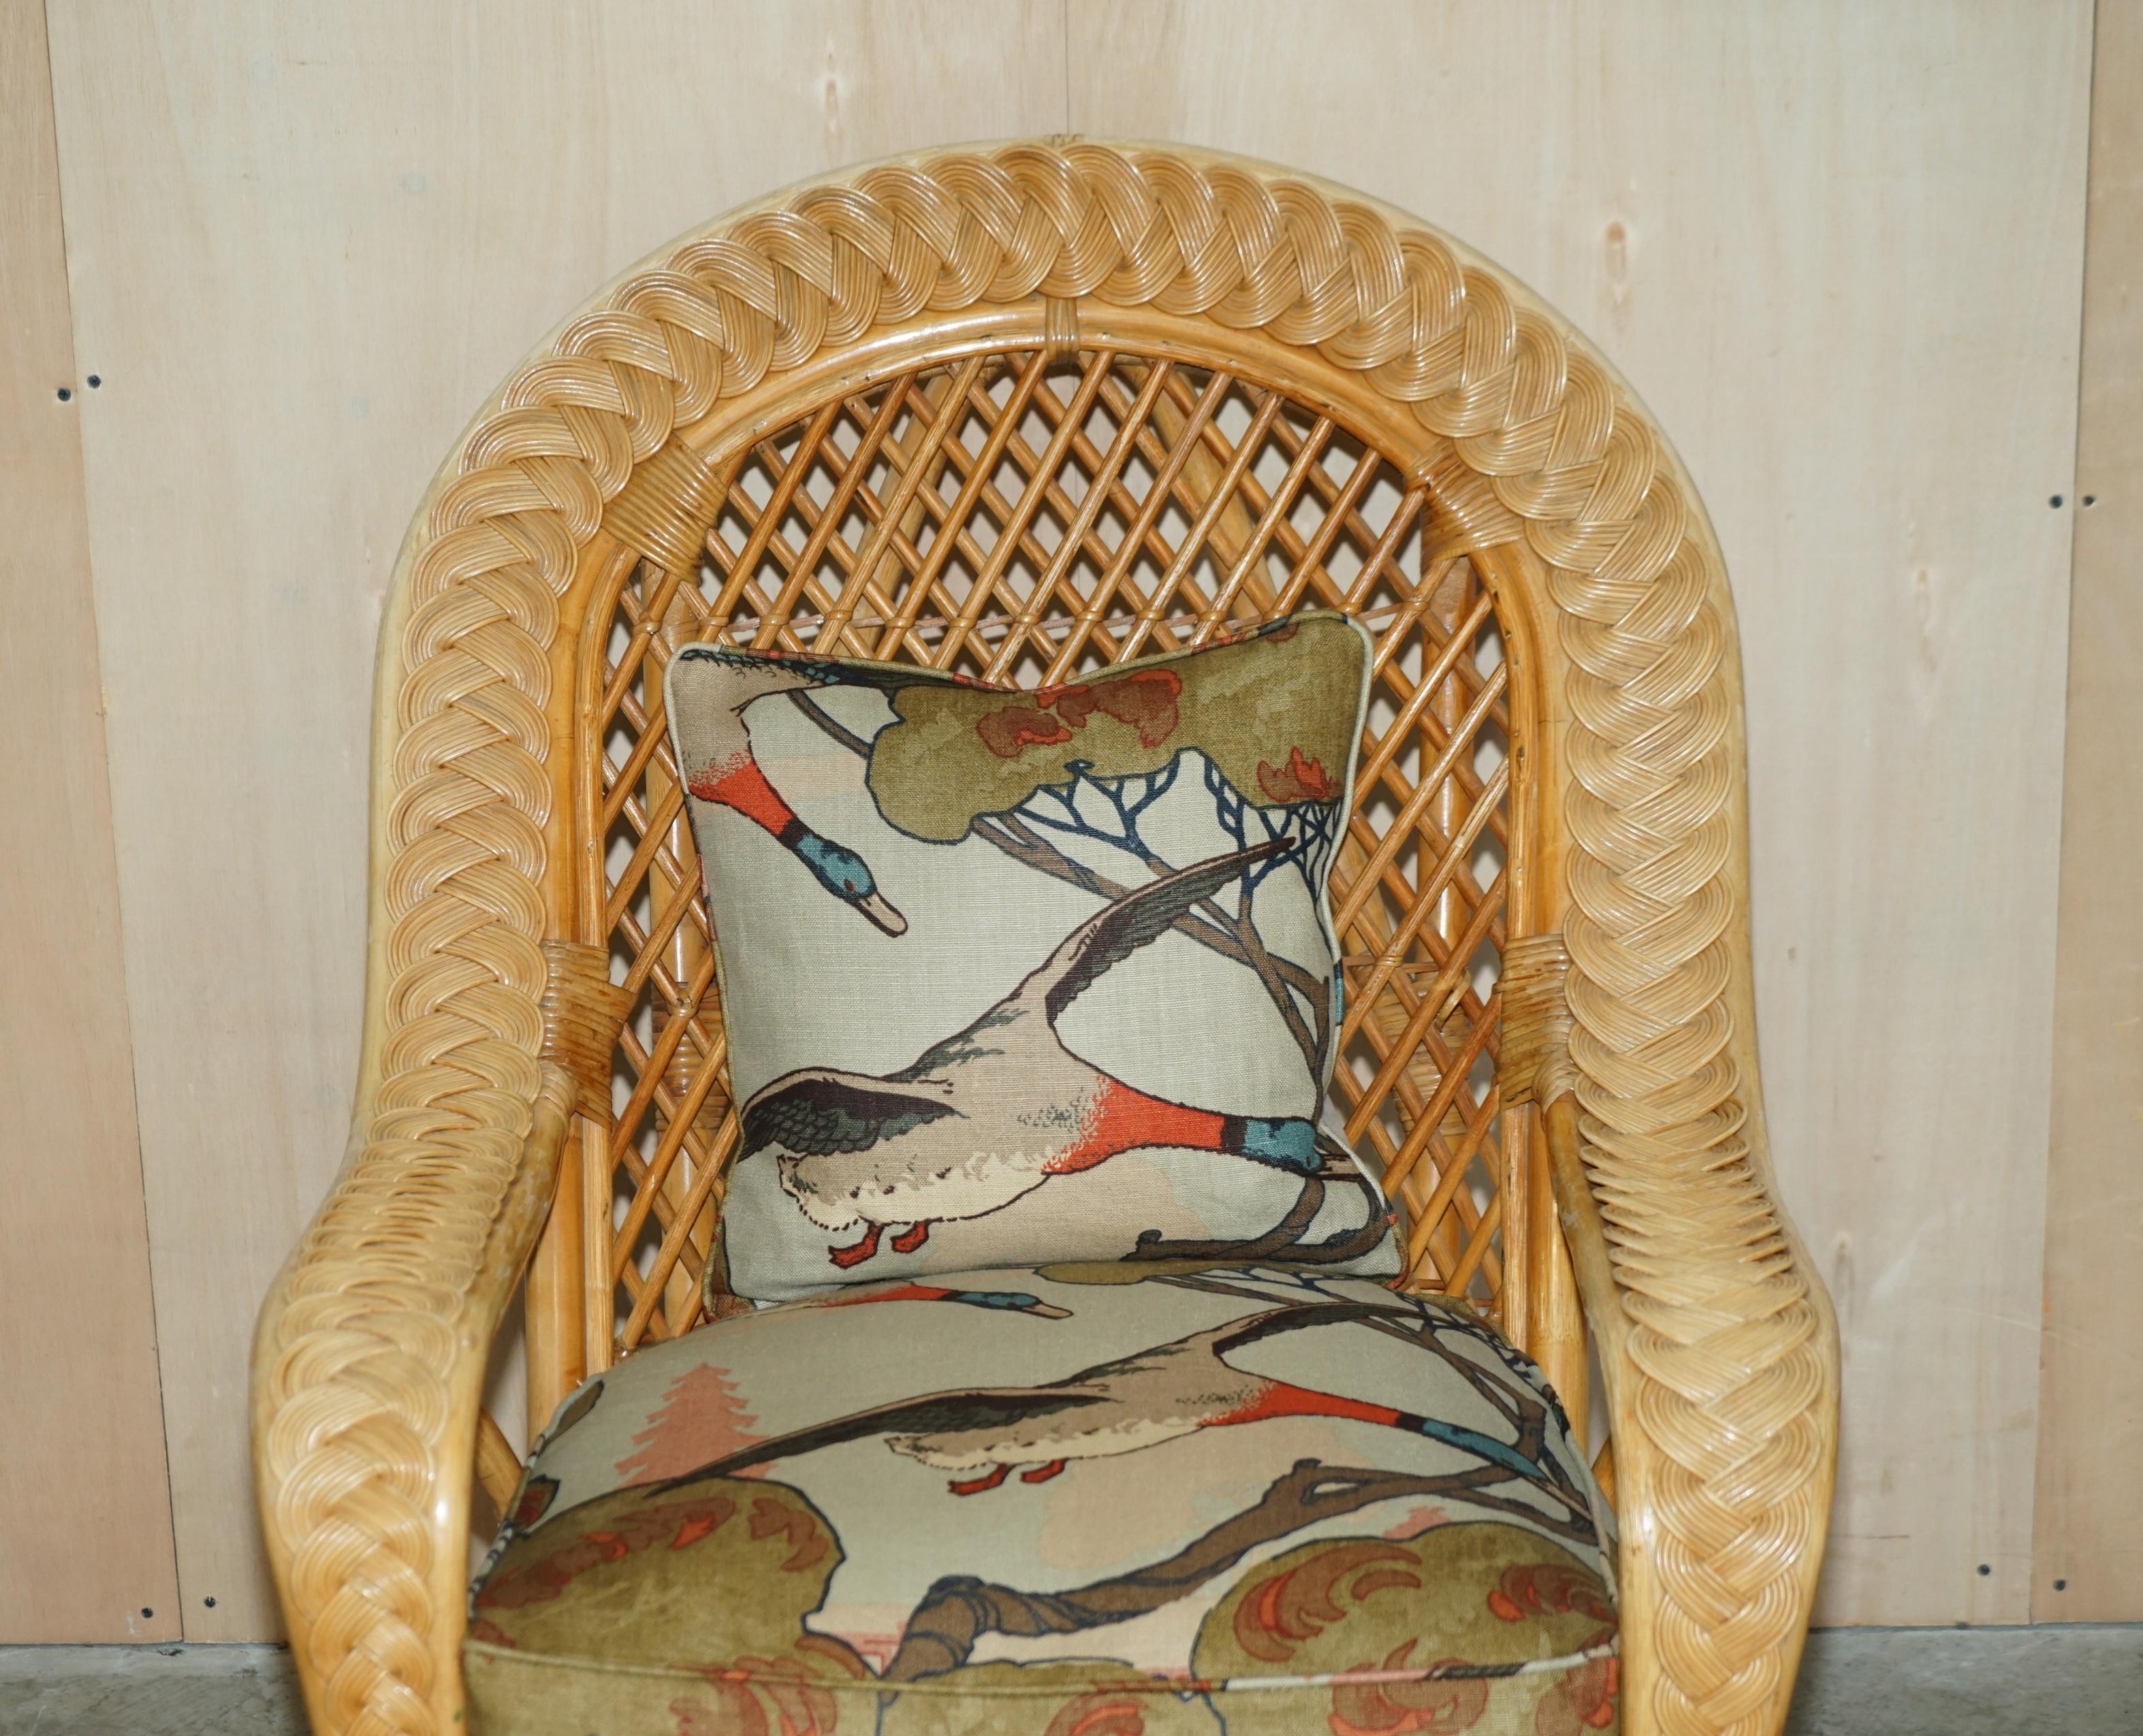 English WICKER ARMCHAIRS STOOL TABLE SUITE UPHOLSTERED WiTH MULBERRY FLYING DUCKS FABRIC For Sale